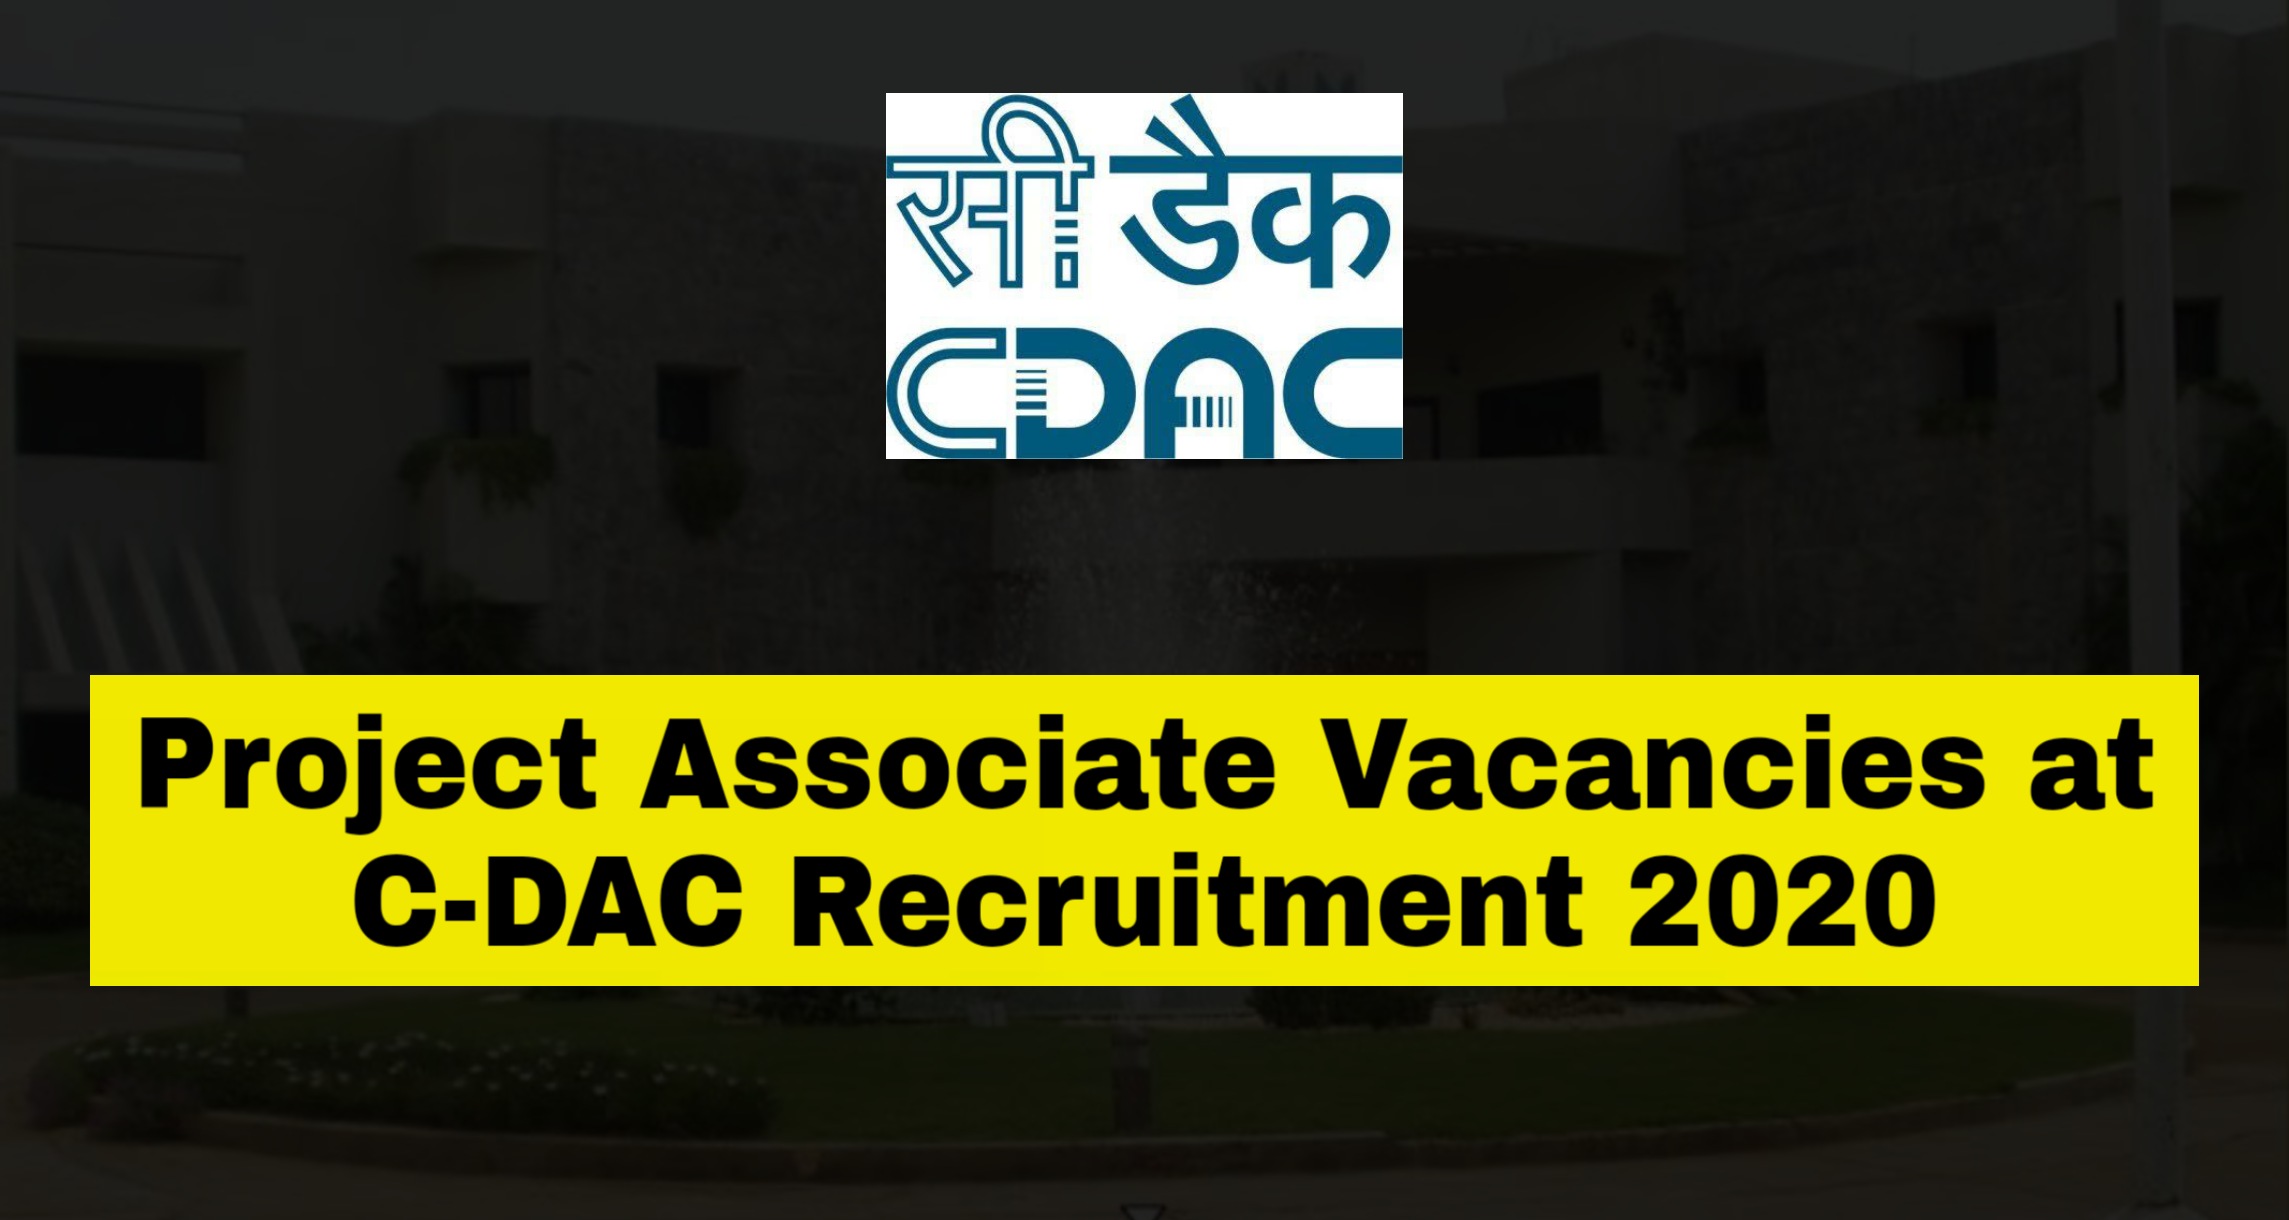 Project Associate vacancies at Centre for Development of Advanced Computing